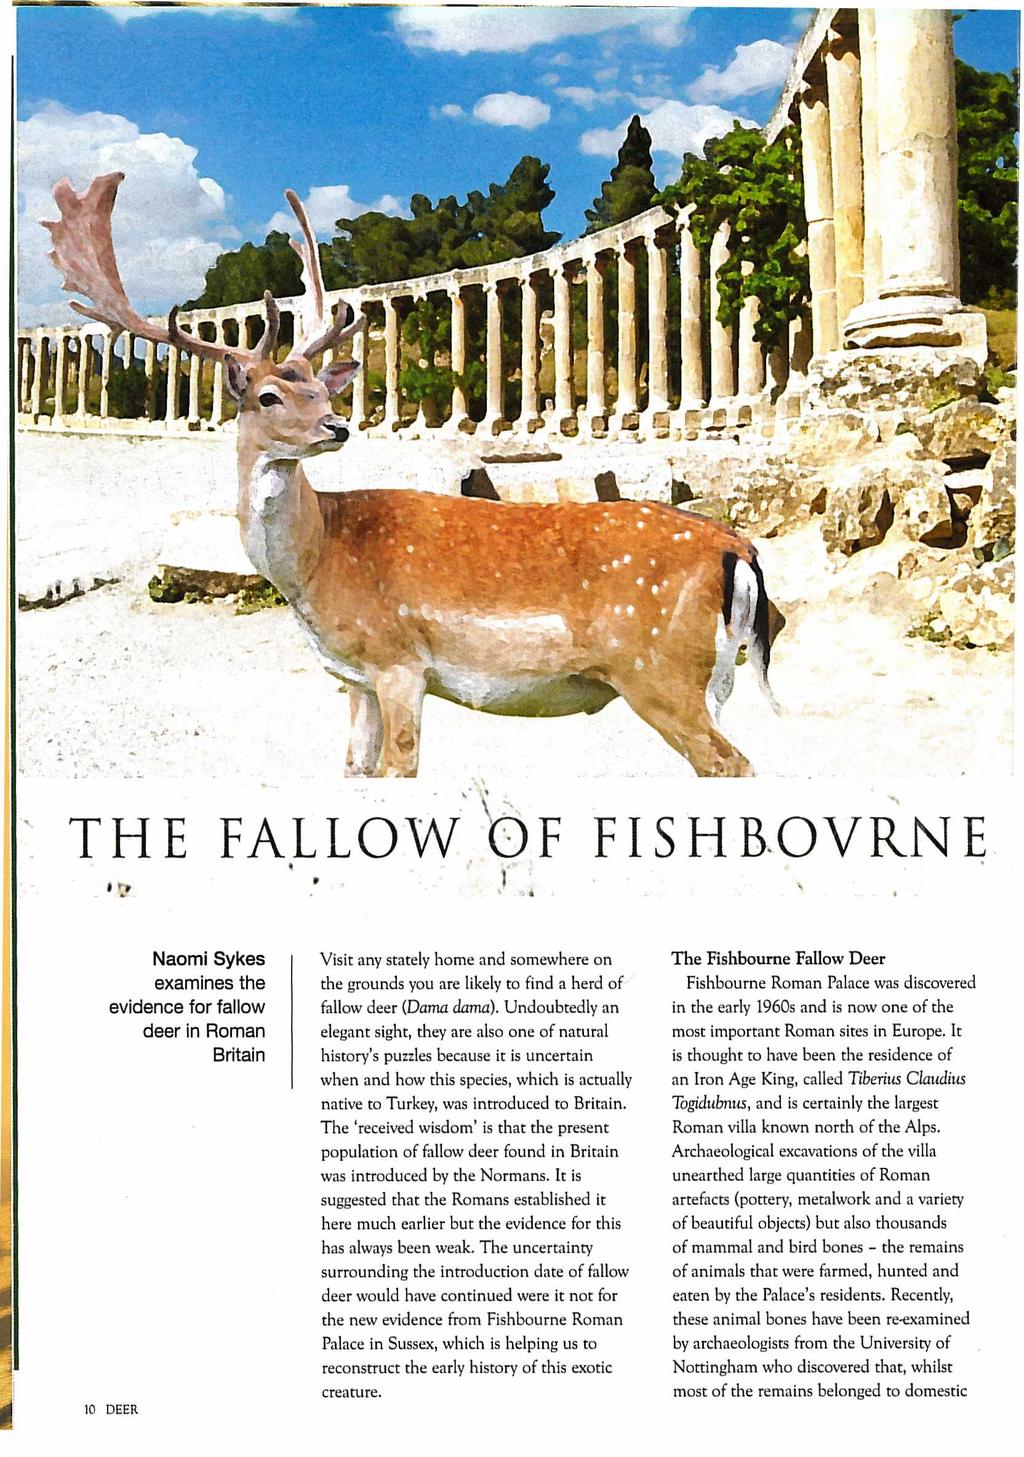 THE FALLOW \OF FISHBOVRNE Naomi Sykes examines the evidence for fallow deer in Roman Britain 10 DEER Visit any stately home and somewhere on the grounds you are likely to find a herd of fallow deer